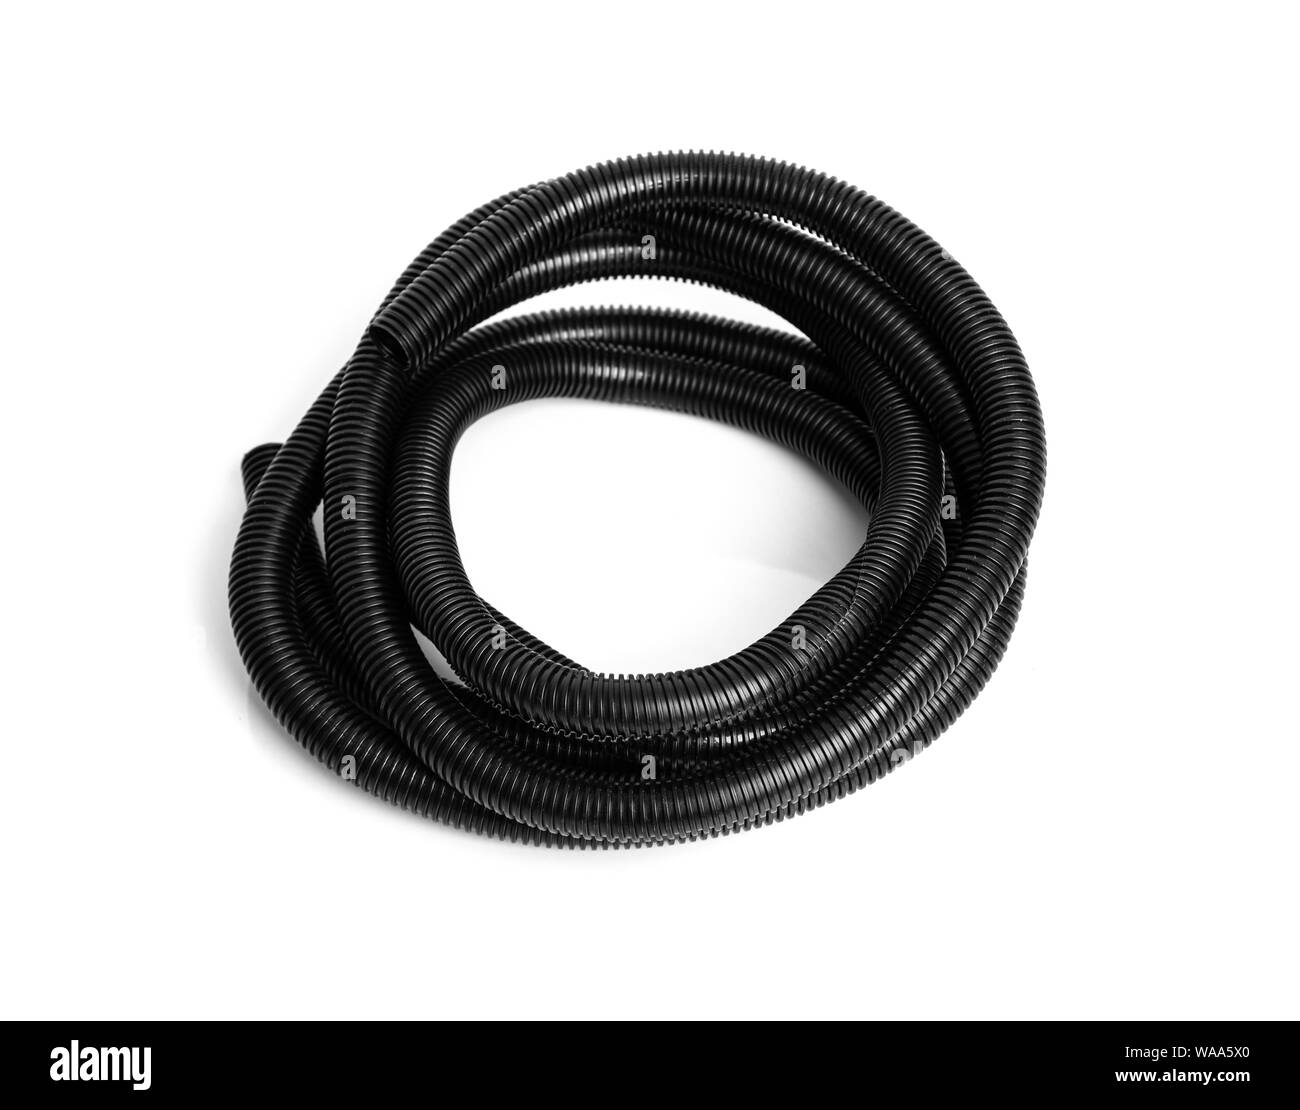 Corrugated plastic hose for electrical wiring on a white background. Stock Photo